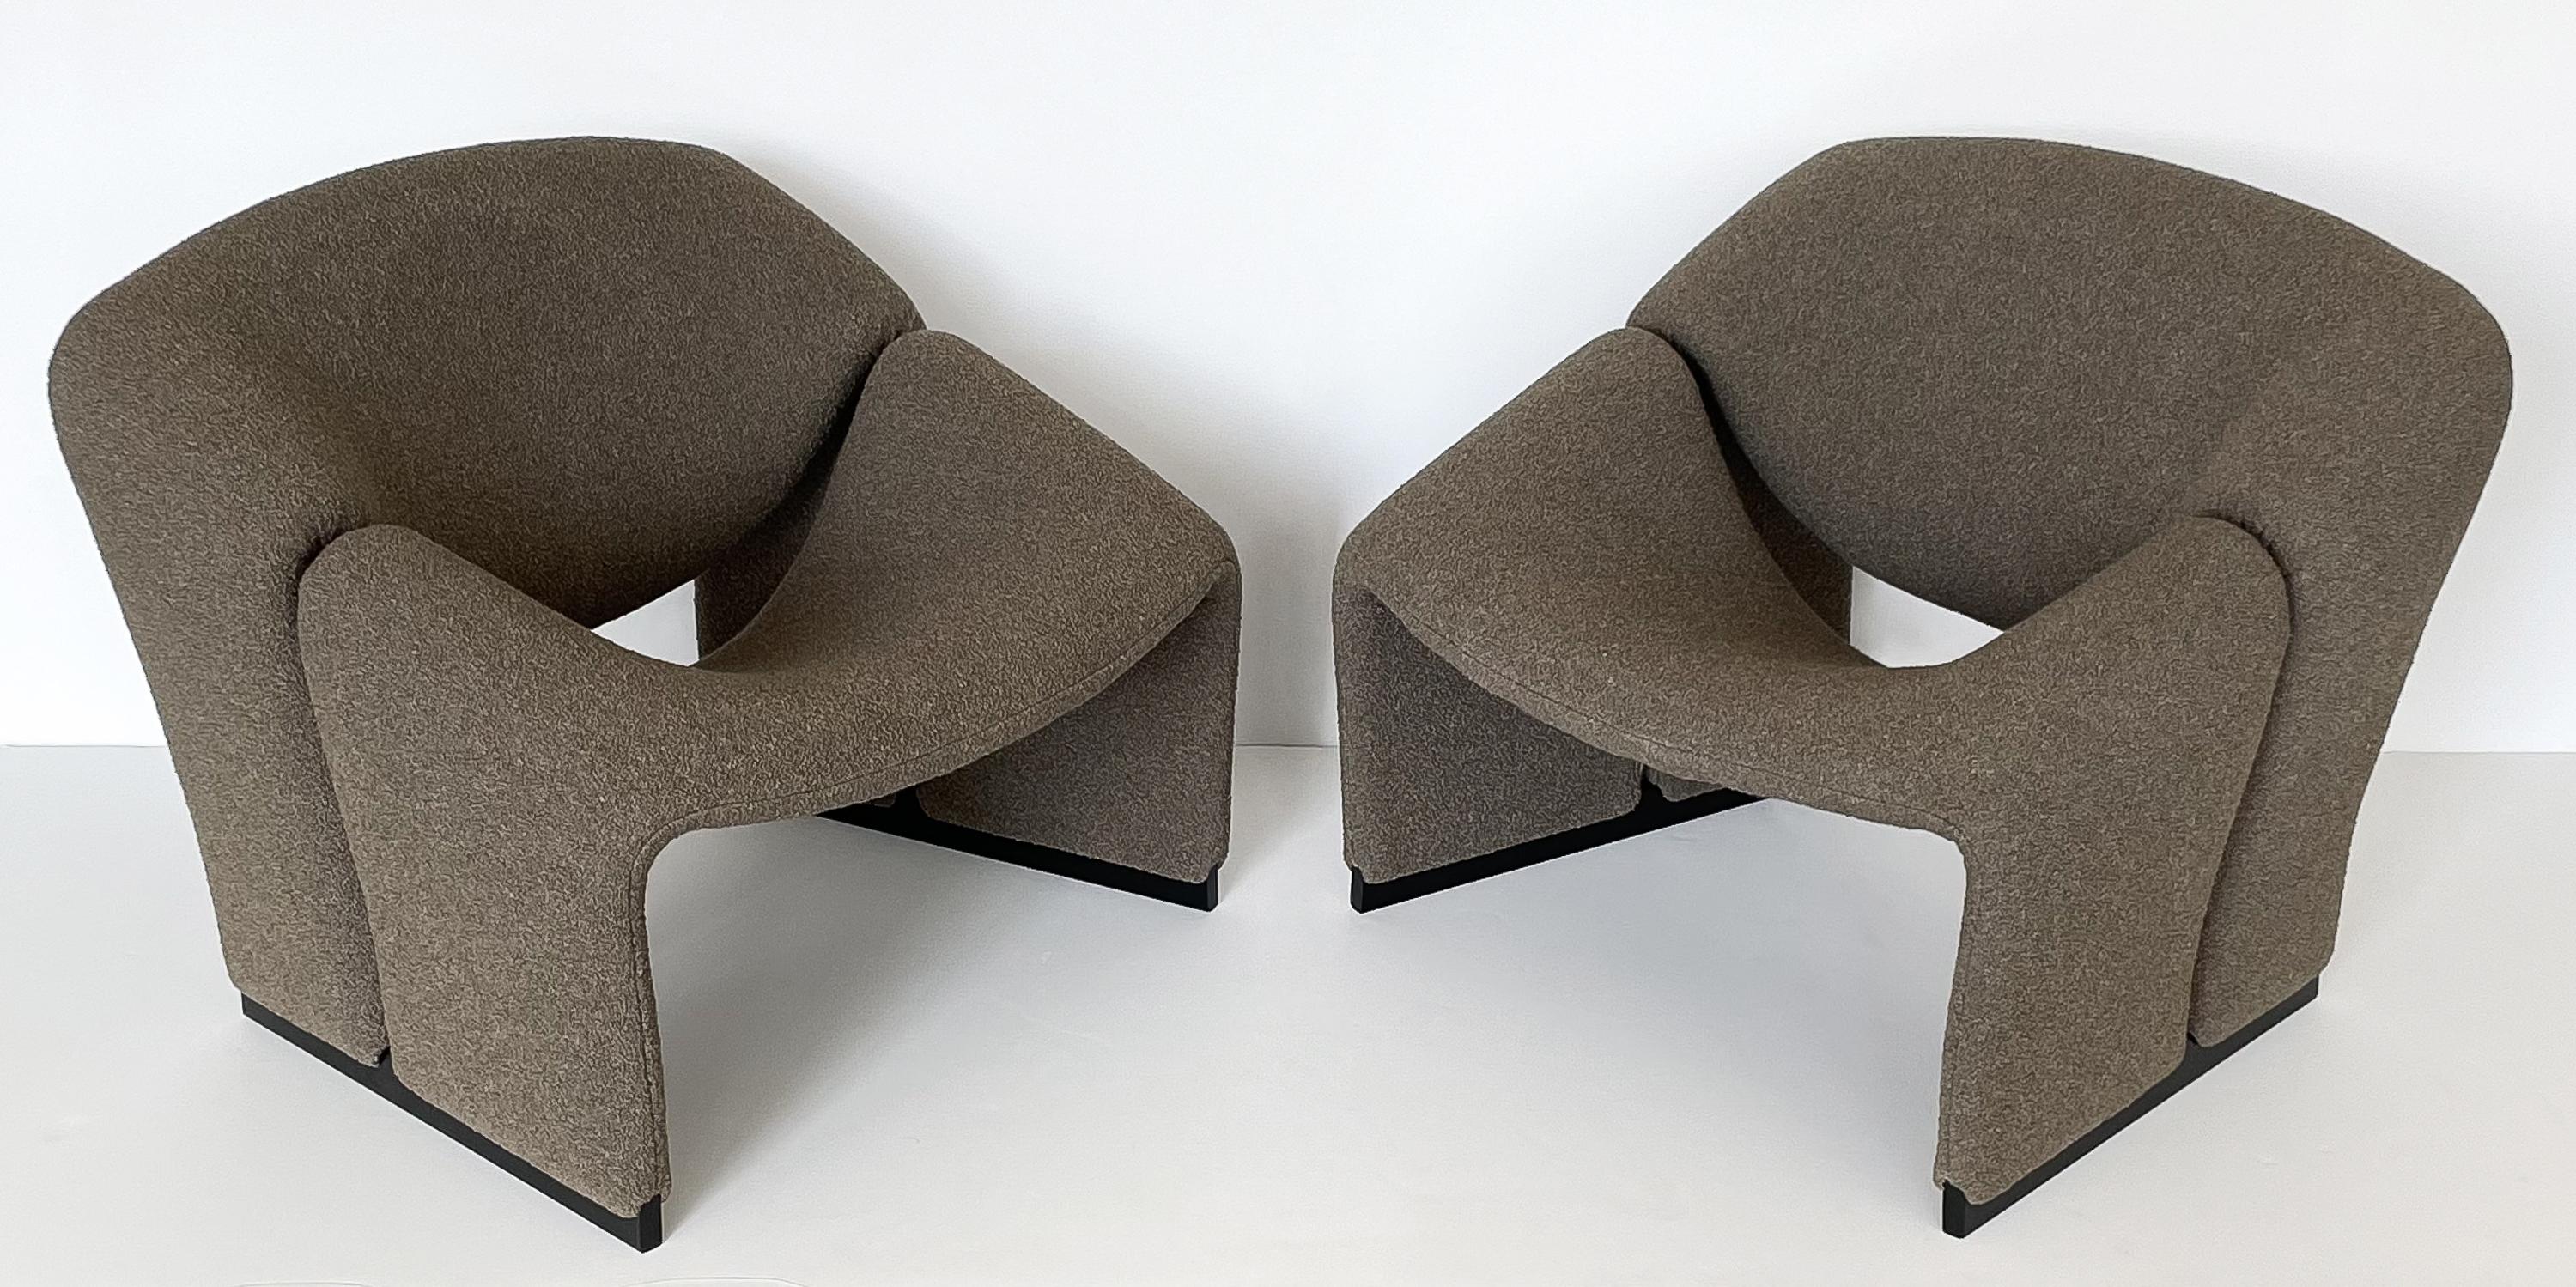 A pair of Model F580 Groovy lounge chairs by Pierre Paulin for Artifort. Designed in 1966 this first interaction of the design which would later evolve into a chair nicknamed the 